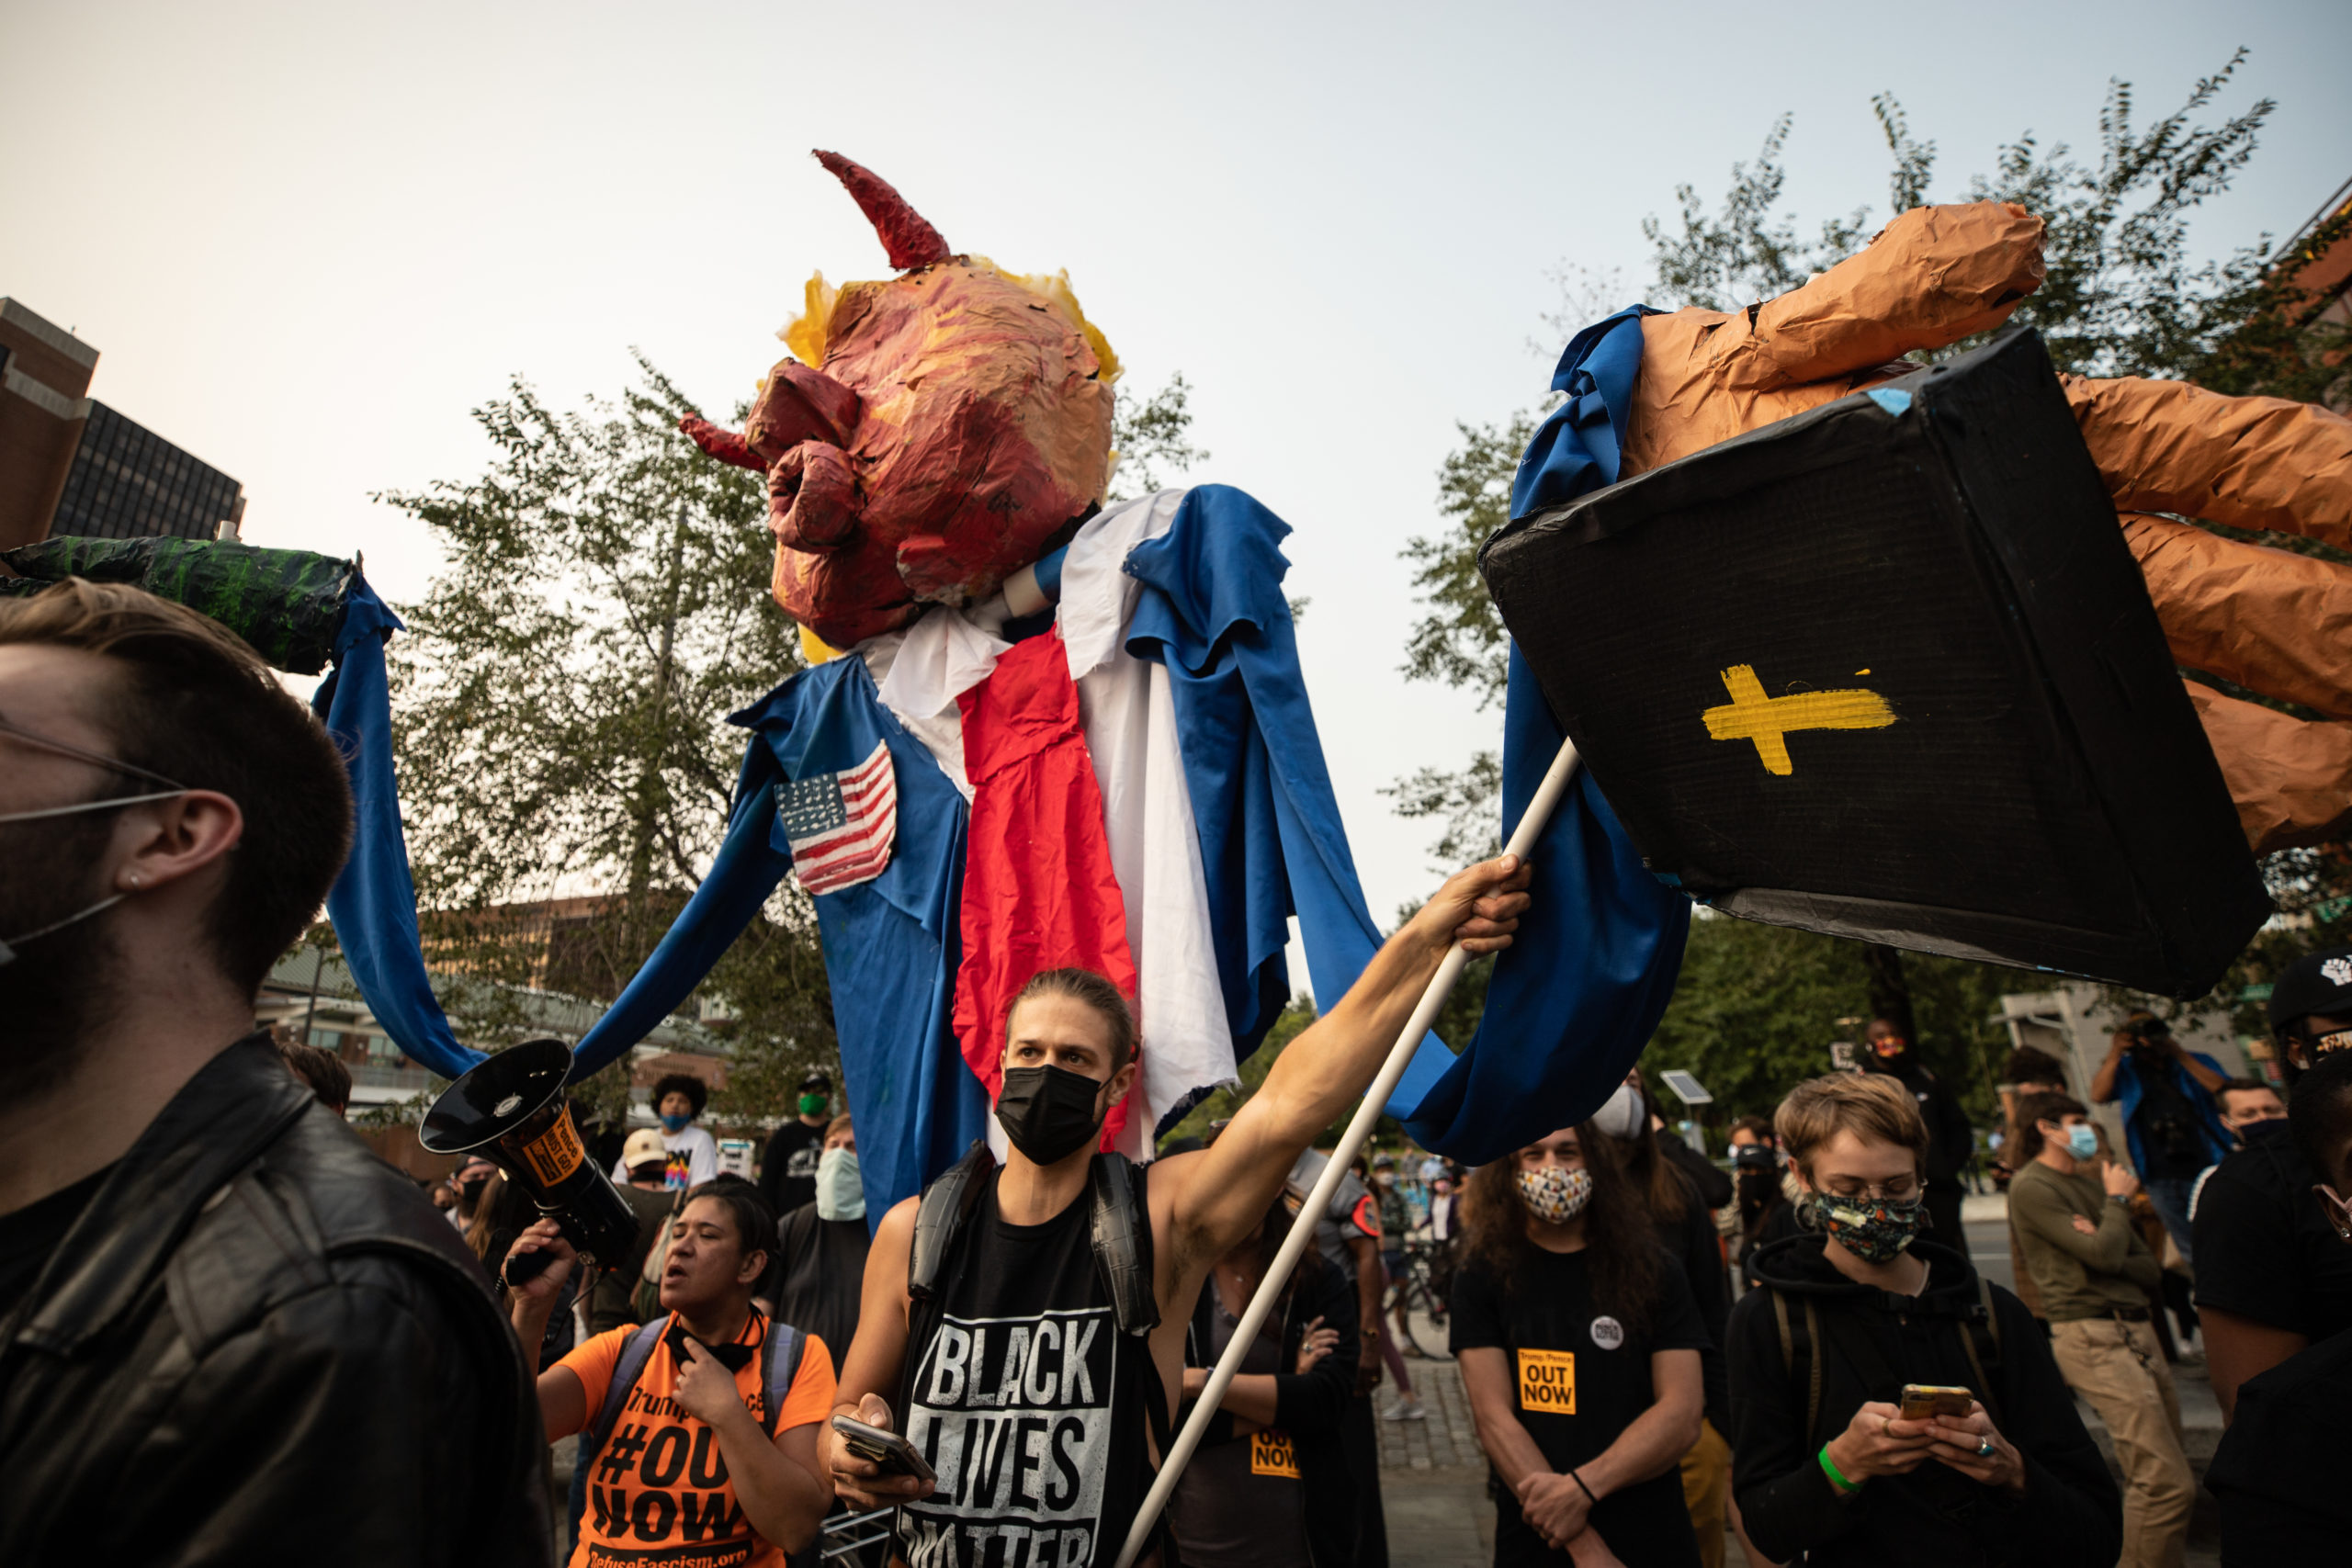 A protester carried a large puppet-like make of President Donald Trump in Philadelphia, Pennsylvania on Sept. 15, 2020. (Photo: Kaylee Greenlee / DCNF)